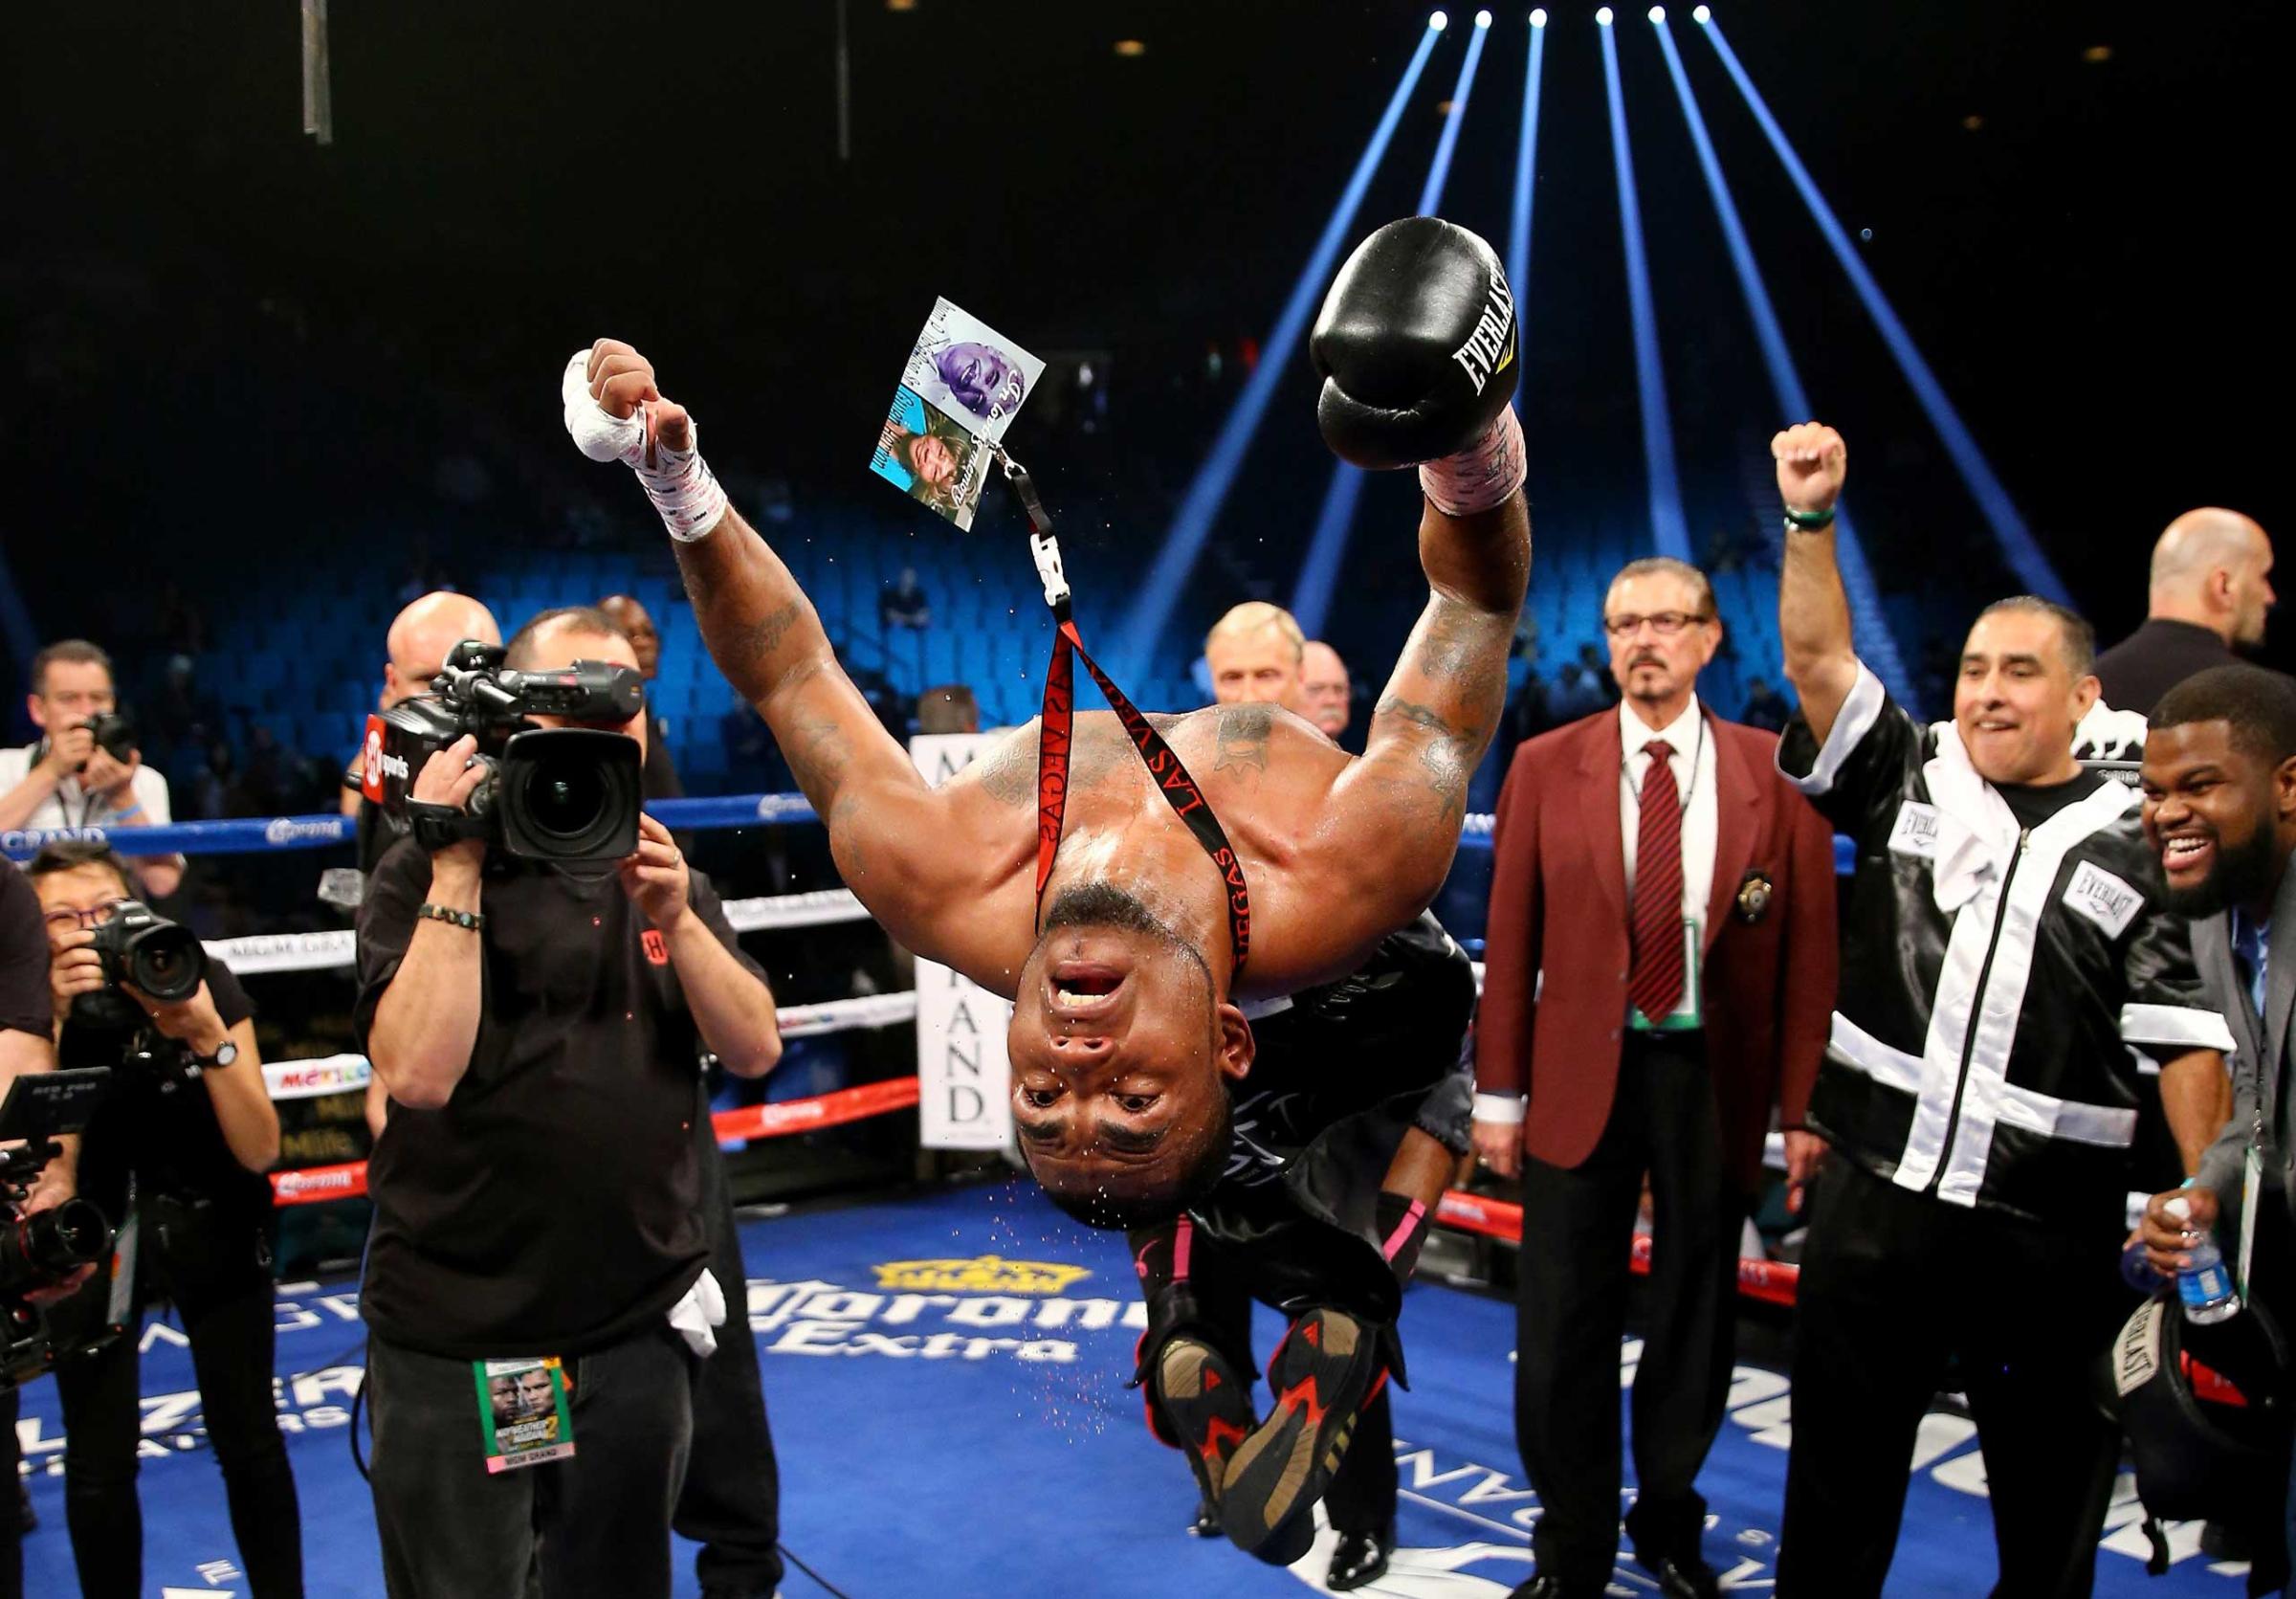 James De la Rosa celebrates his victory against Alfredo Angulo during their middleweight fight at the MGM Grand Garden Arena on Sept. 13, 2014 in Las Vegas.